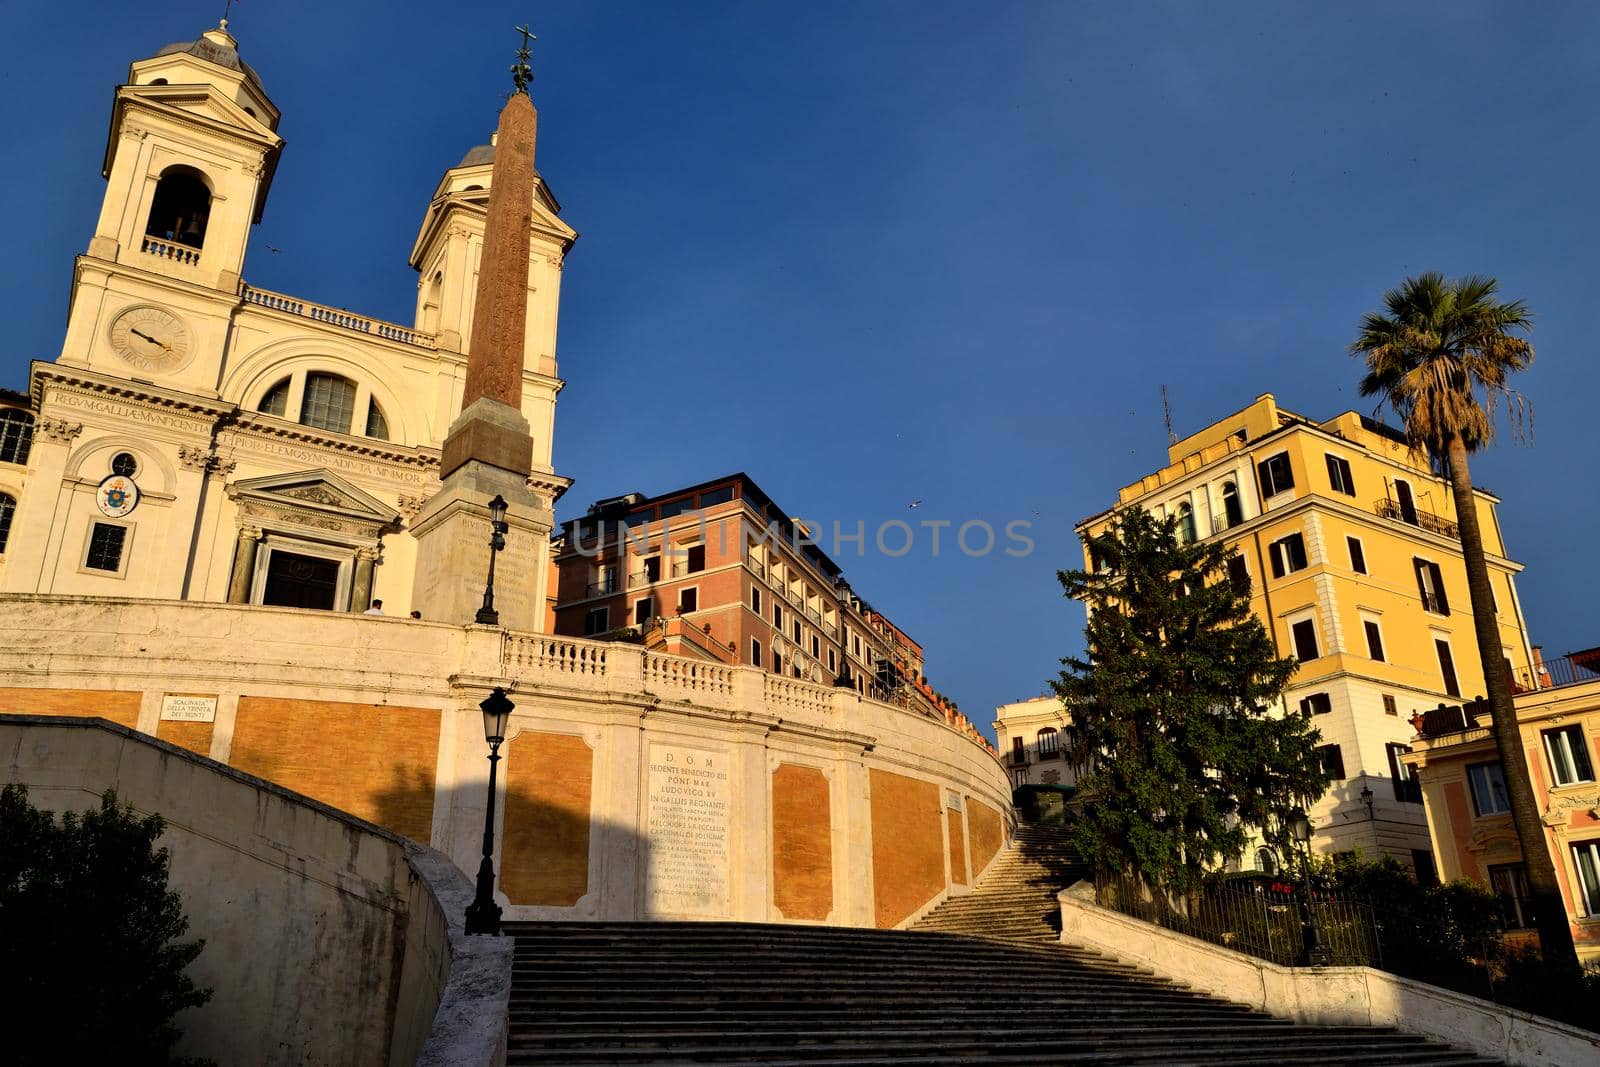 View of the Trinita dei Monti without tourists due to the phase 2 of lockdown by silentstock639